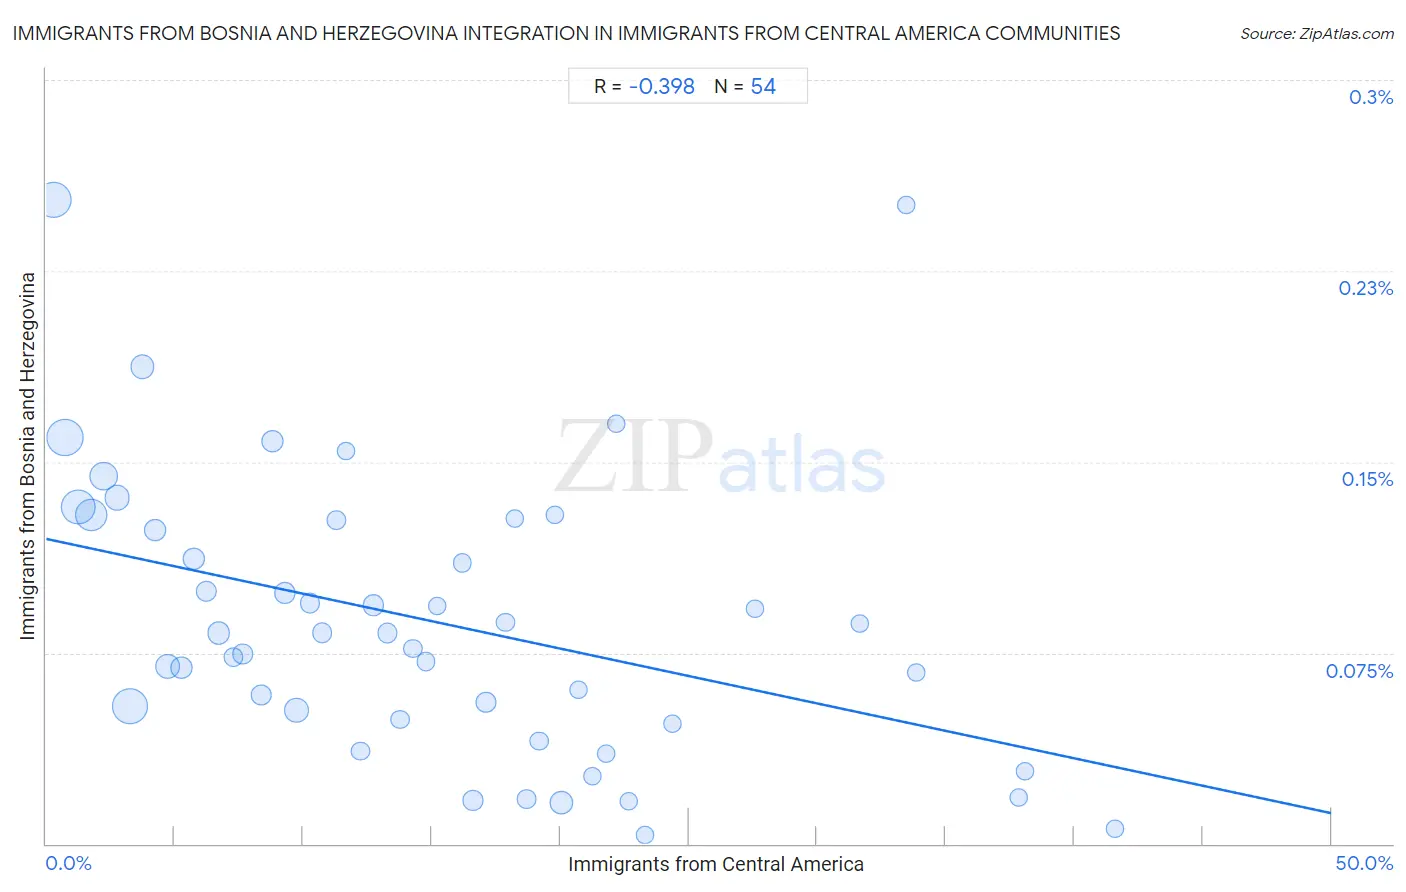 Immigrants from Central America Integration in Immigrants from Bosnia and Herzegovina Communities